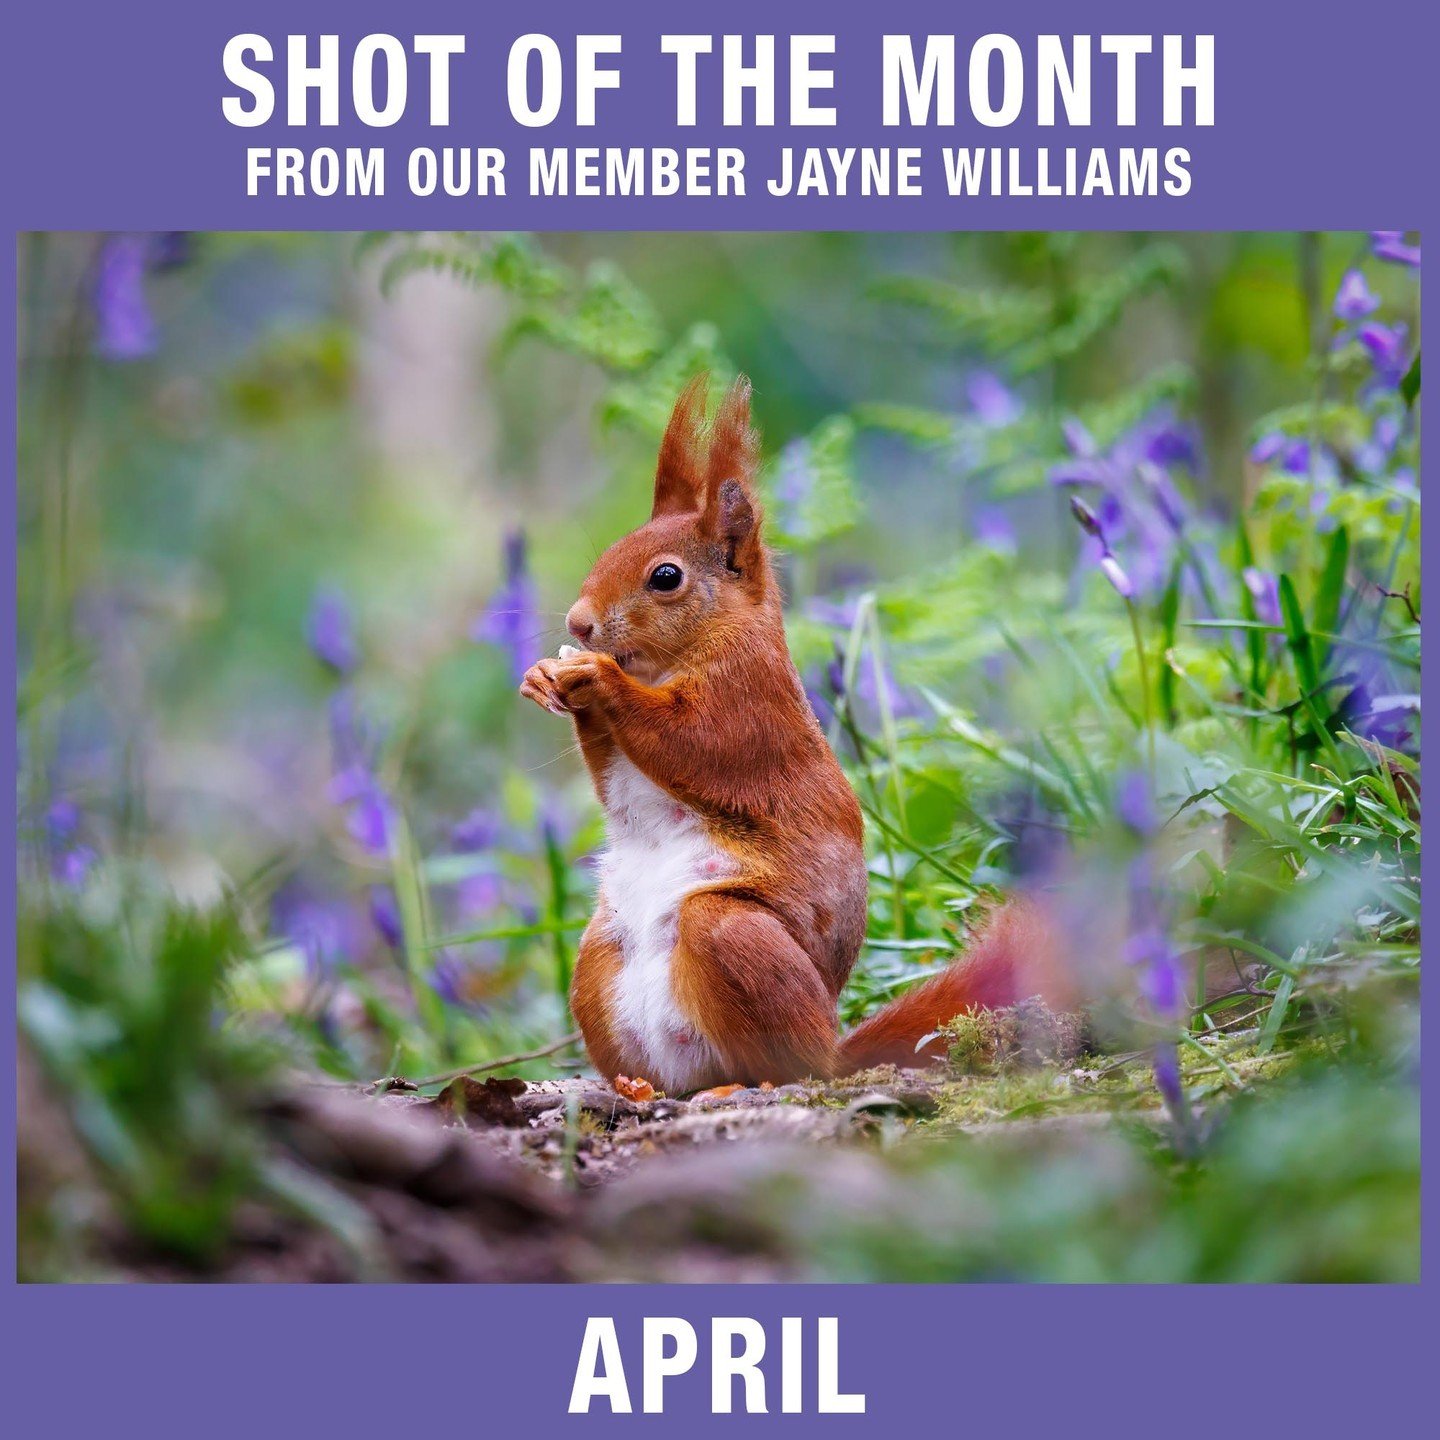 Well done to our member Jayne Williams @wmsjayne for winning April's Shot of The Month! 👏 📸

f/7.1 - 1/500 sec - ISO 2000

Jayne writes, &quot;Popped out this morning to see what I could find before the rain came down. So very lucky to spy this gor